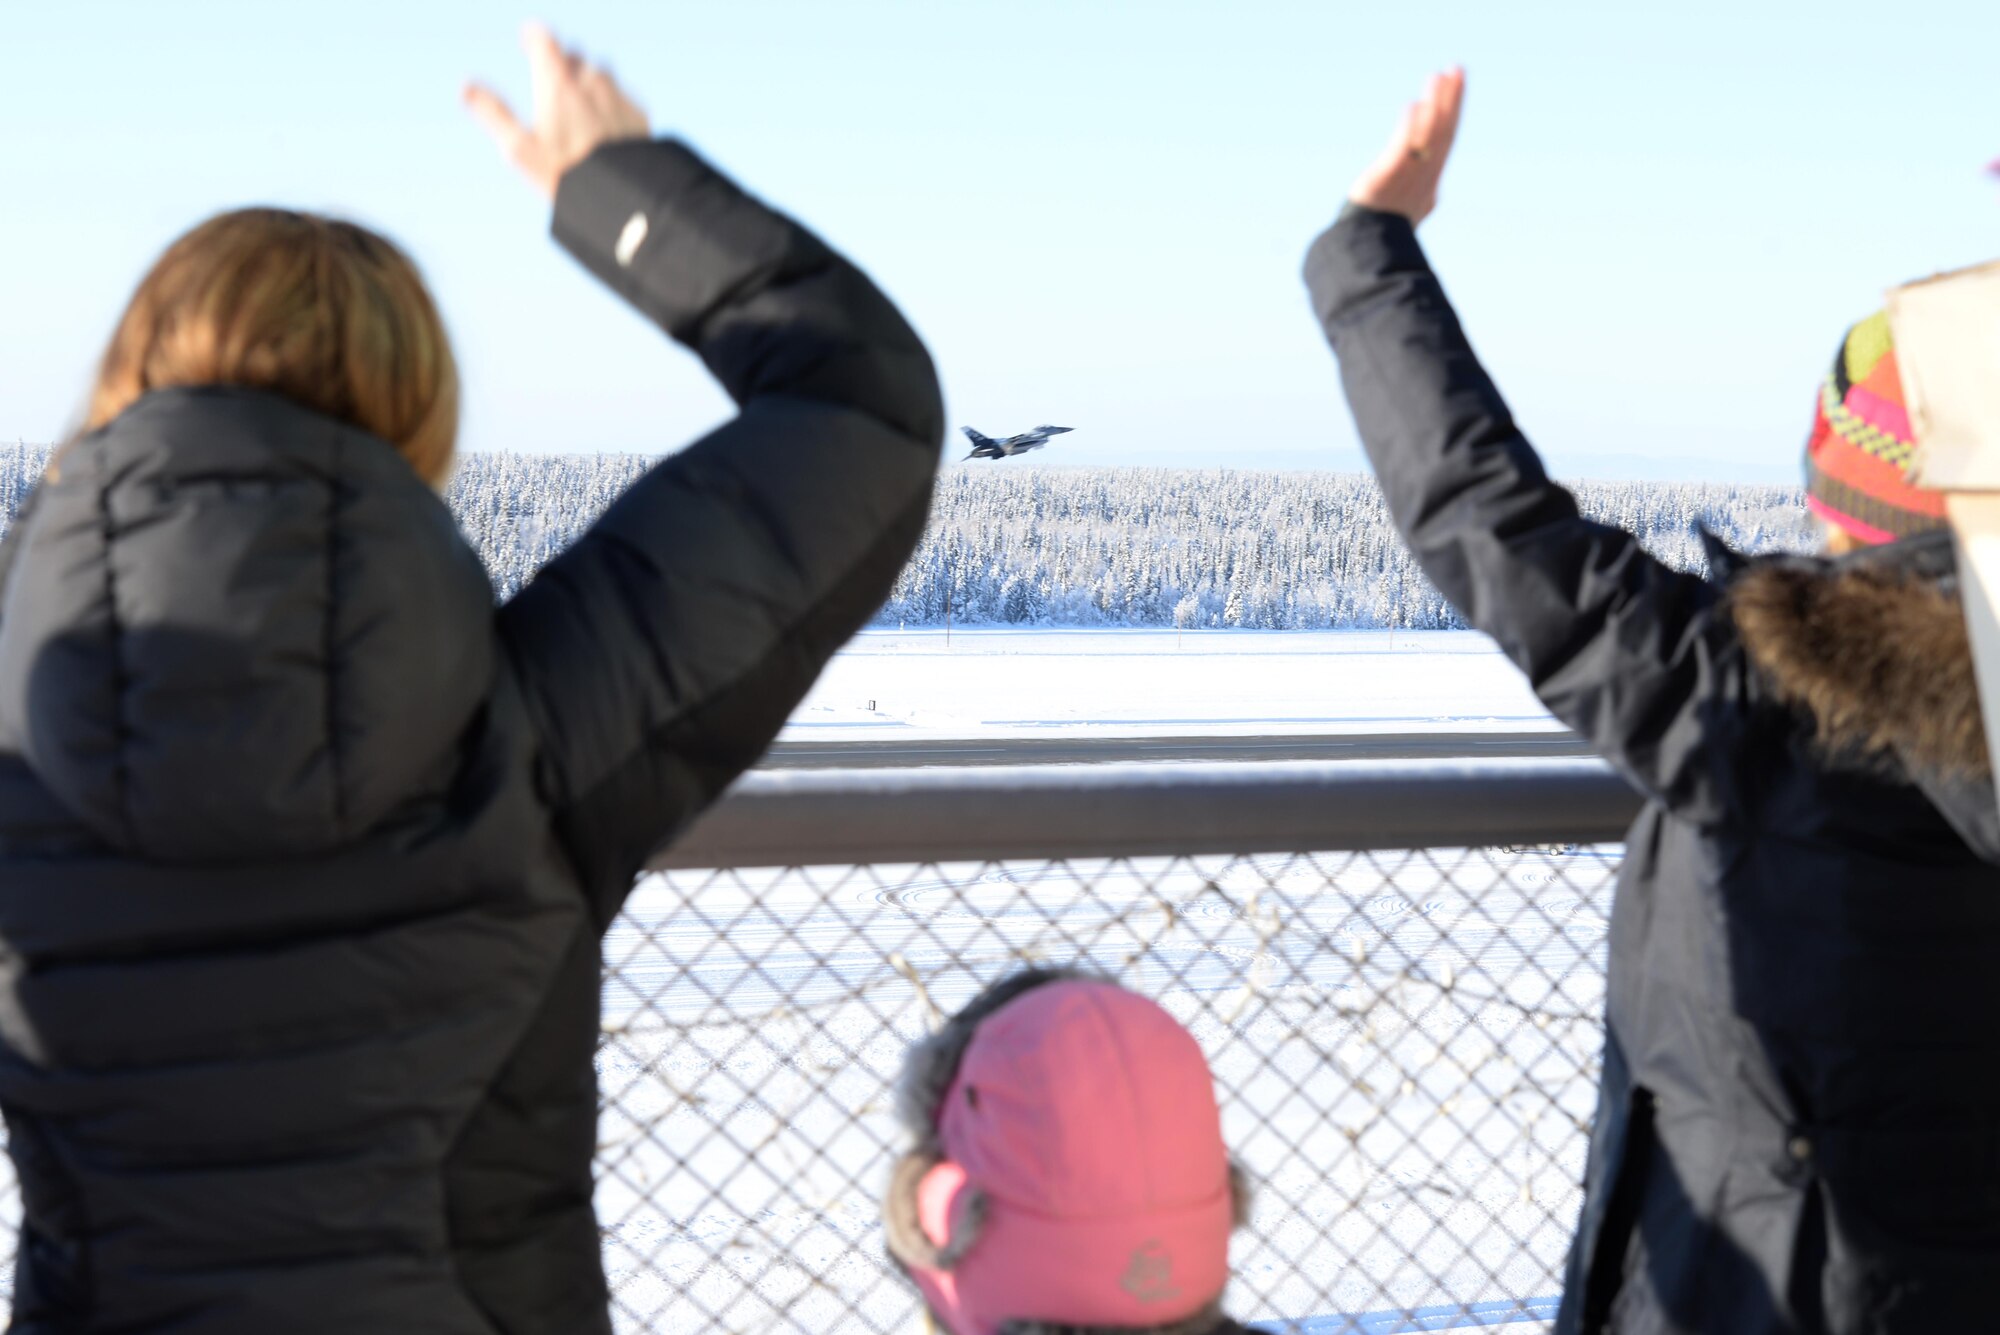 Family members wave goodbye to pilots as they take off Feb. 12, 2017, at Eielson Air Force Base, Alaska. The pilots from he 18th Aggressor Squadron departed to support COPE NORTH 2017, an exercise which provides the opportunity for tri-lateral field training exercises which imnproves combat readiness, develops synergistic humanitarian assistance and/or disaster relief operations, and increases interoperability between the U.S., Royal Australian Air Force and Japanese Air Self-Defense Force. (U.S. Air Force Photo by Airman Eric M. Fisher)